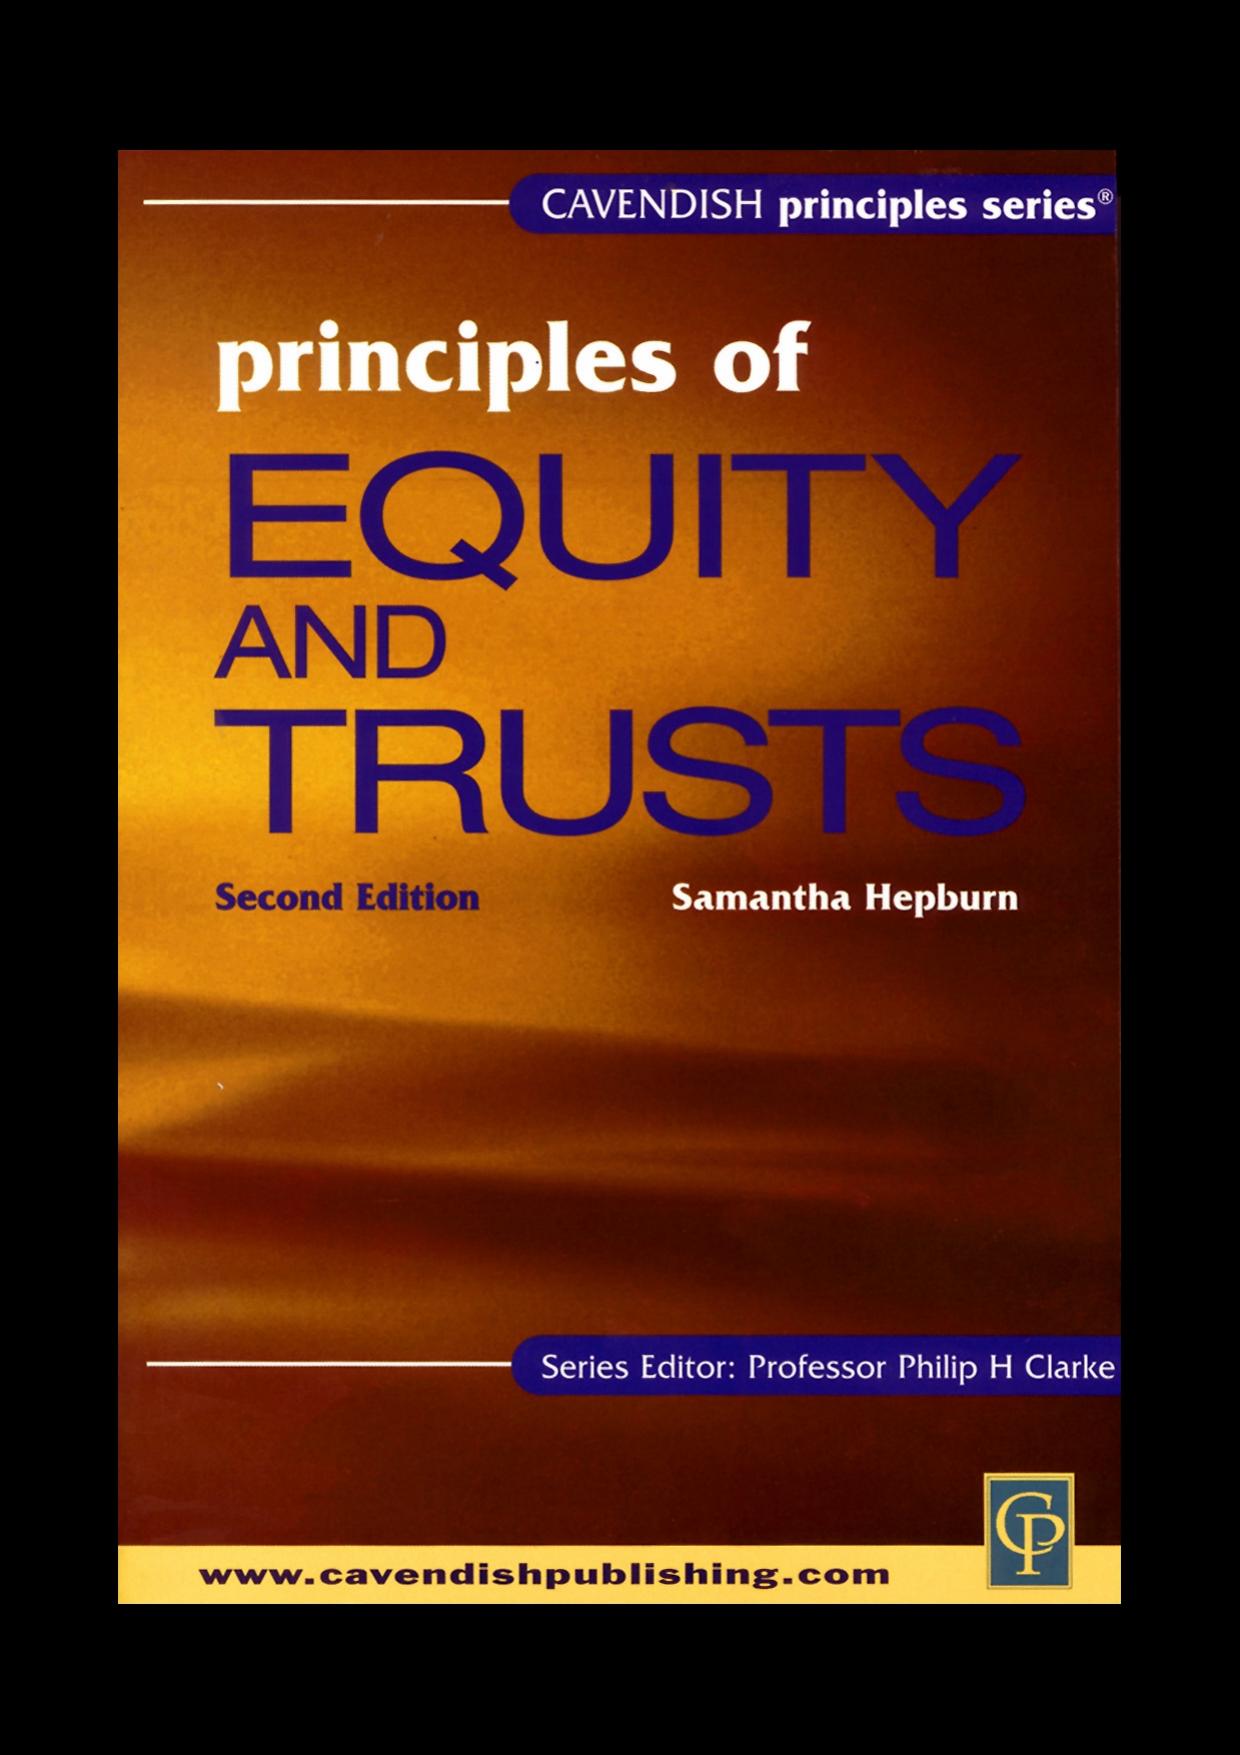 Principles of Equity and Trusts, Second Edition